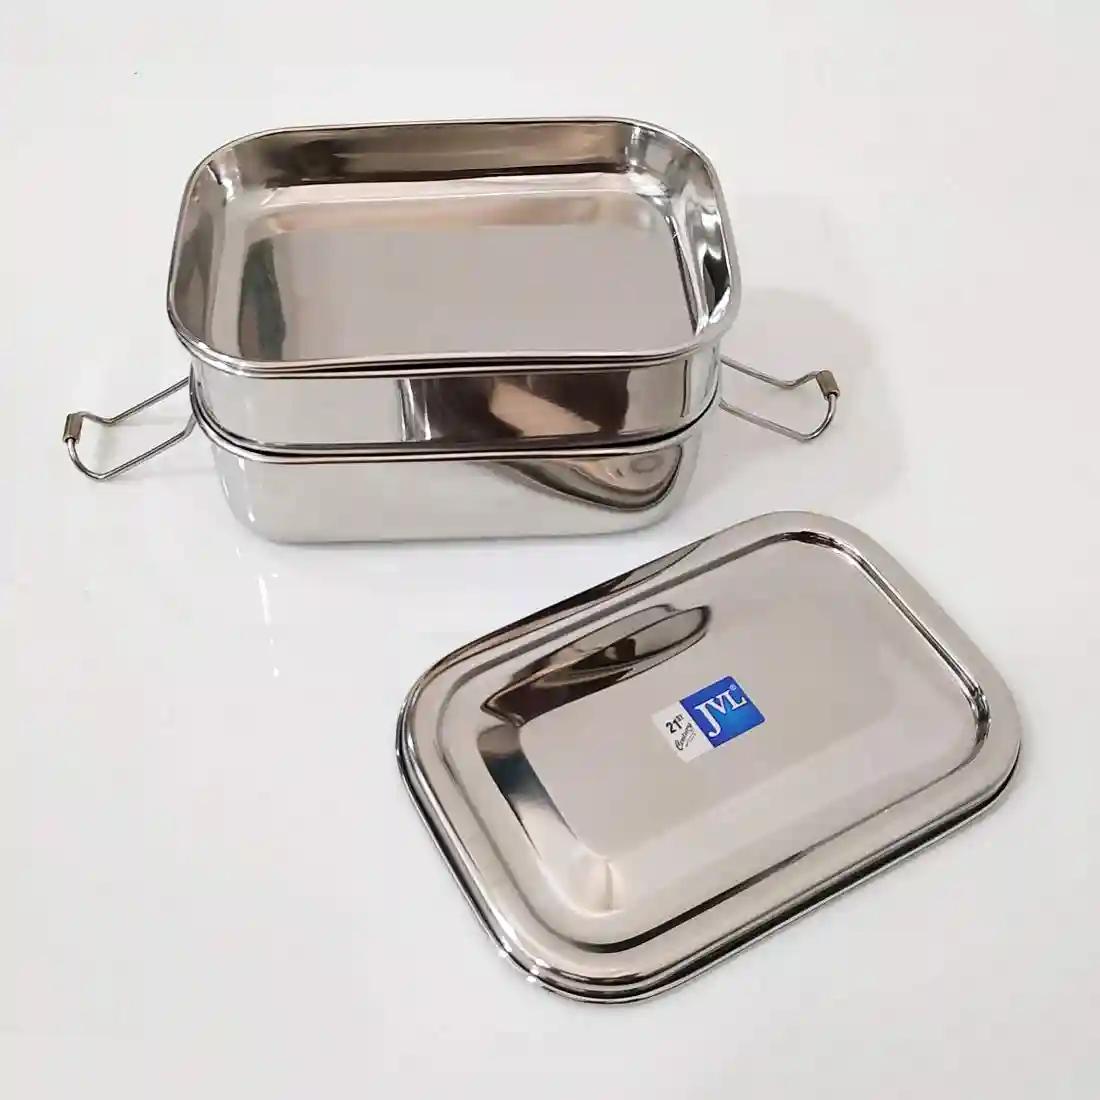 Jvl Stainless Steel Rectangular Shape Double Layer Lunch Box With Inner Plate & Small Deluxe Lunch Box With Mini Container Not Leak Proof - Pack Of 2